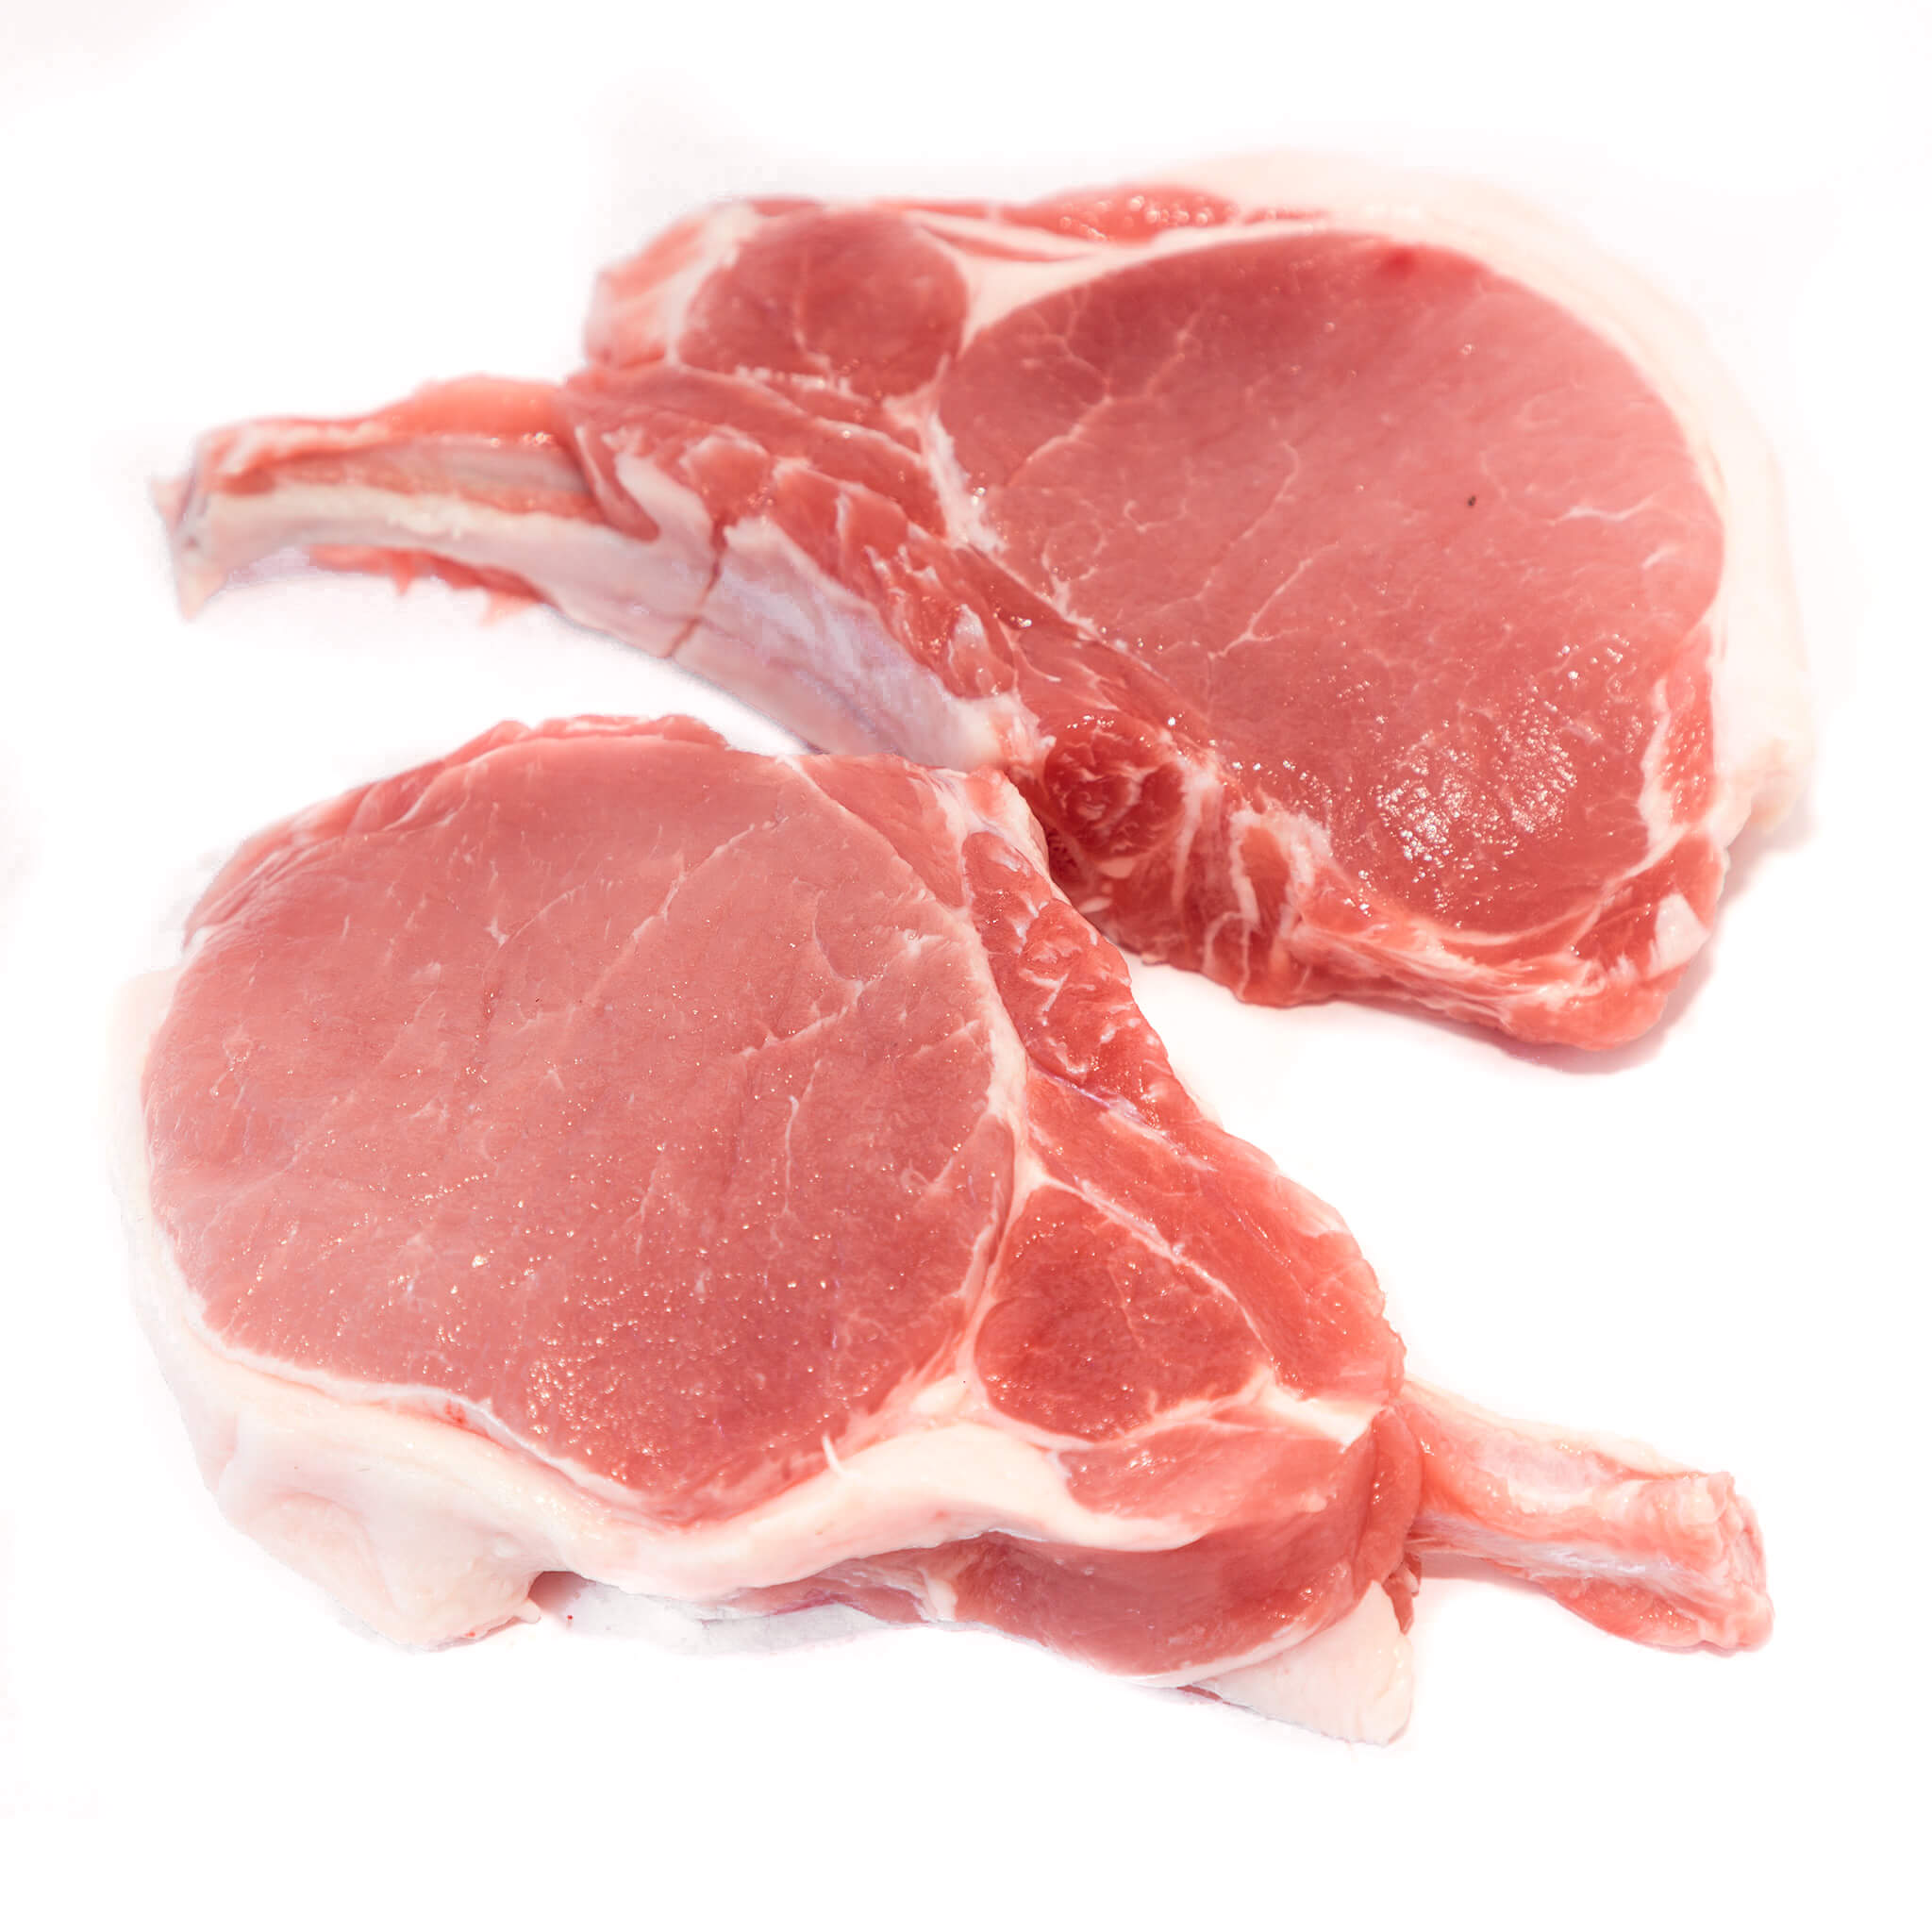 2 Pork Cutlets for delivery in Sydney from Steve Costi Seafood